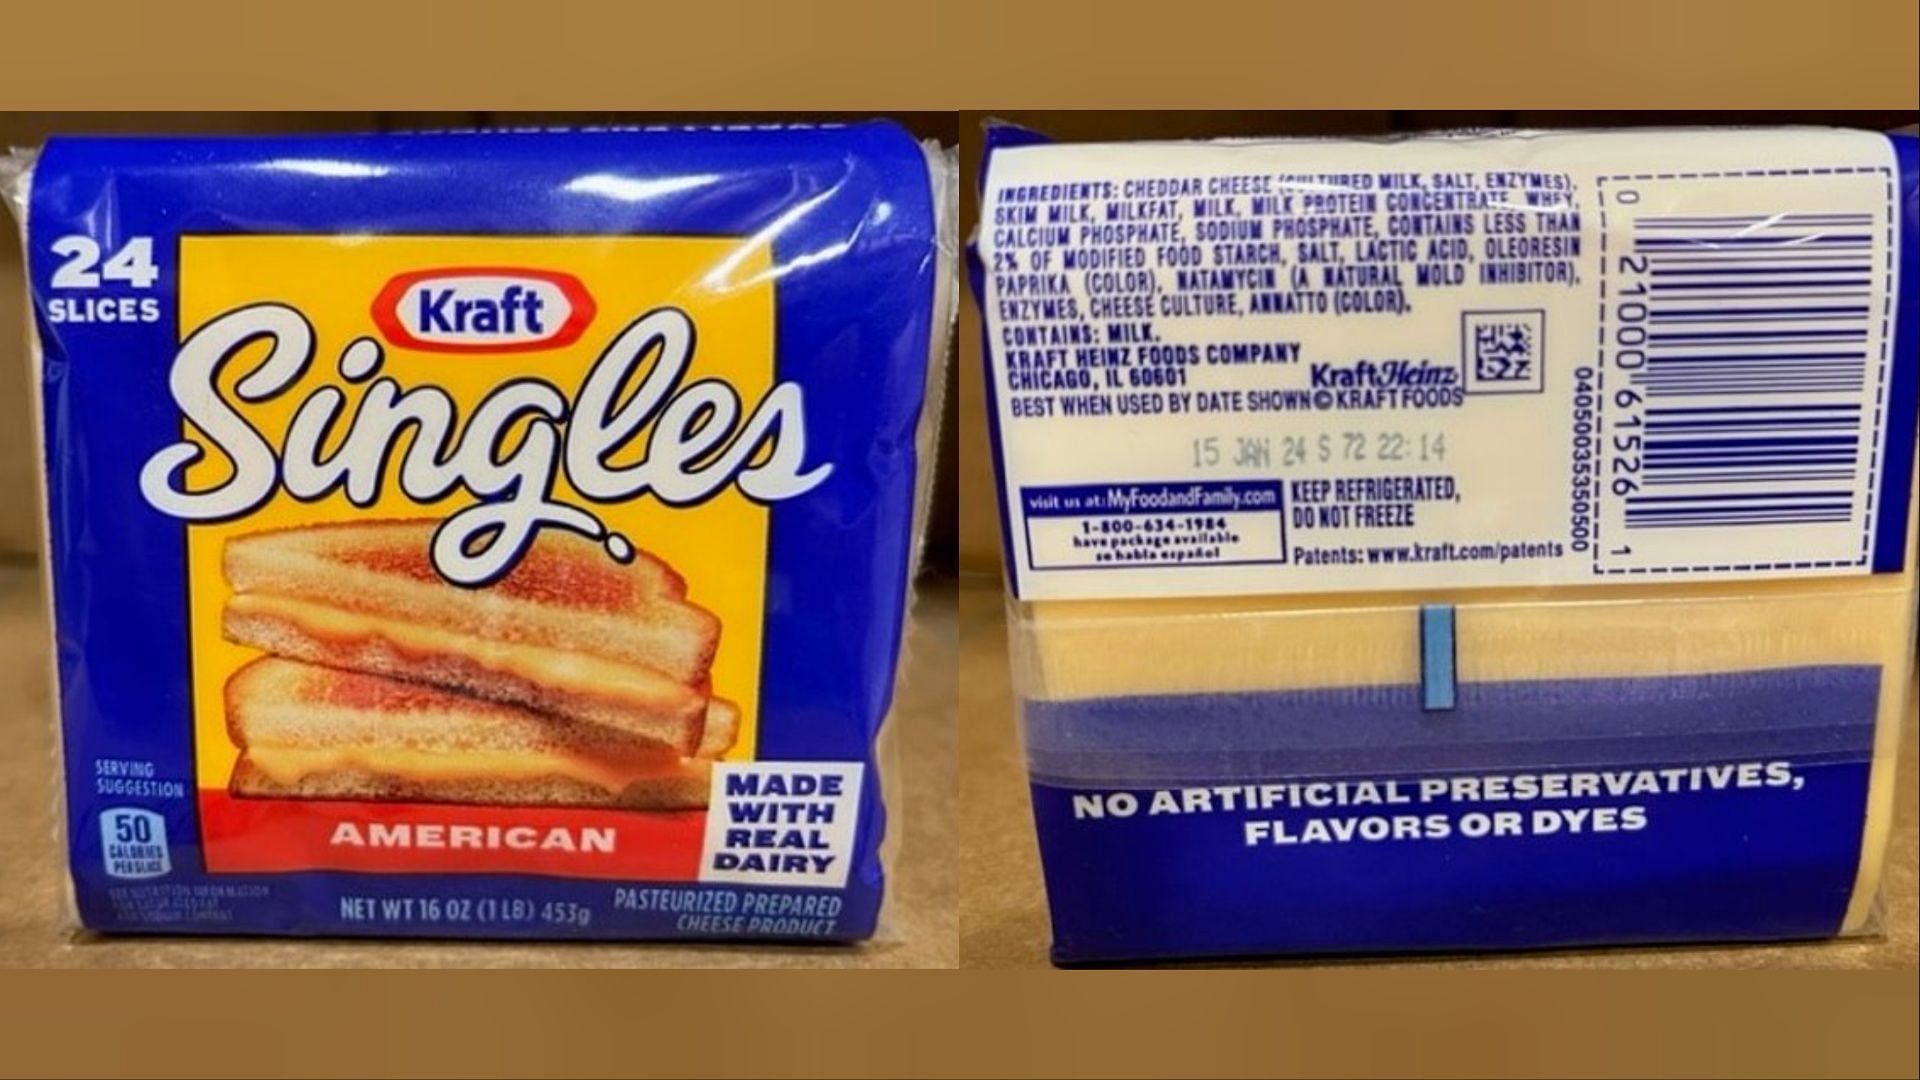 The recalled Kraft S. American Cheese Slices were sold through major retailers and online (Image via Kraft Heinz)